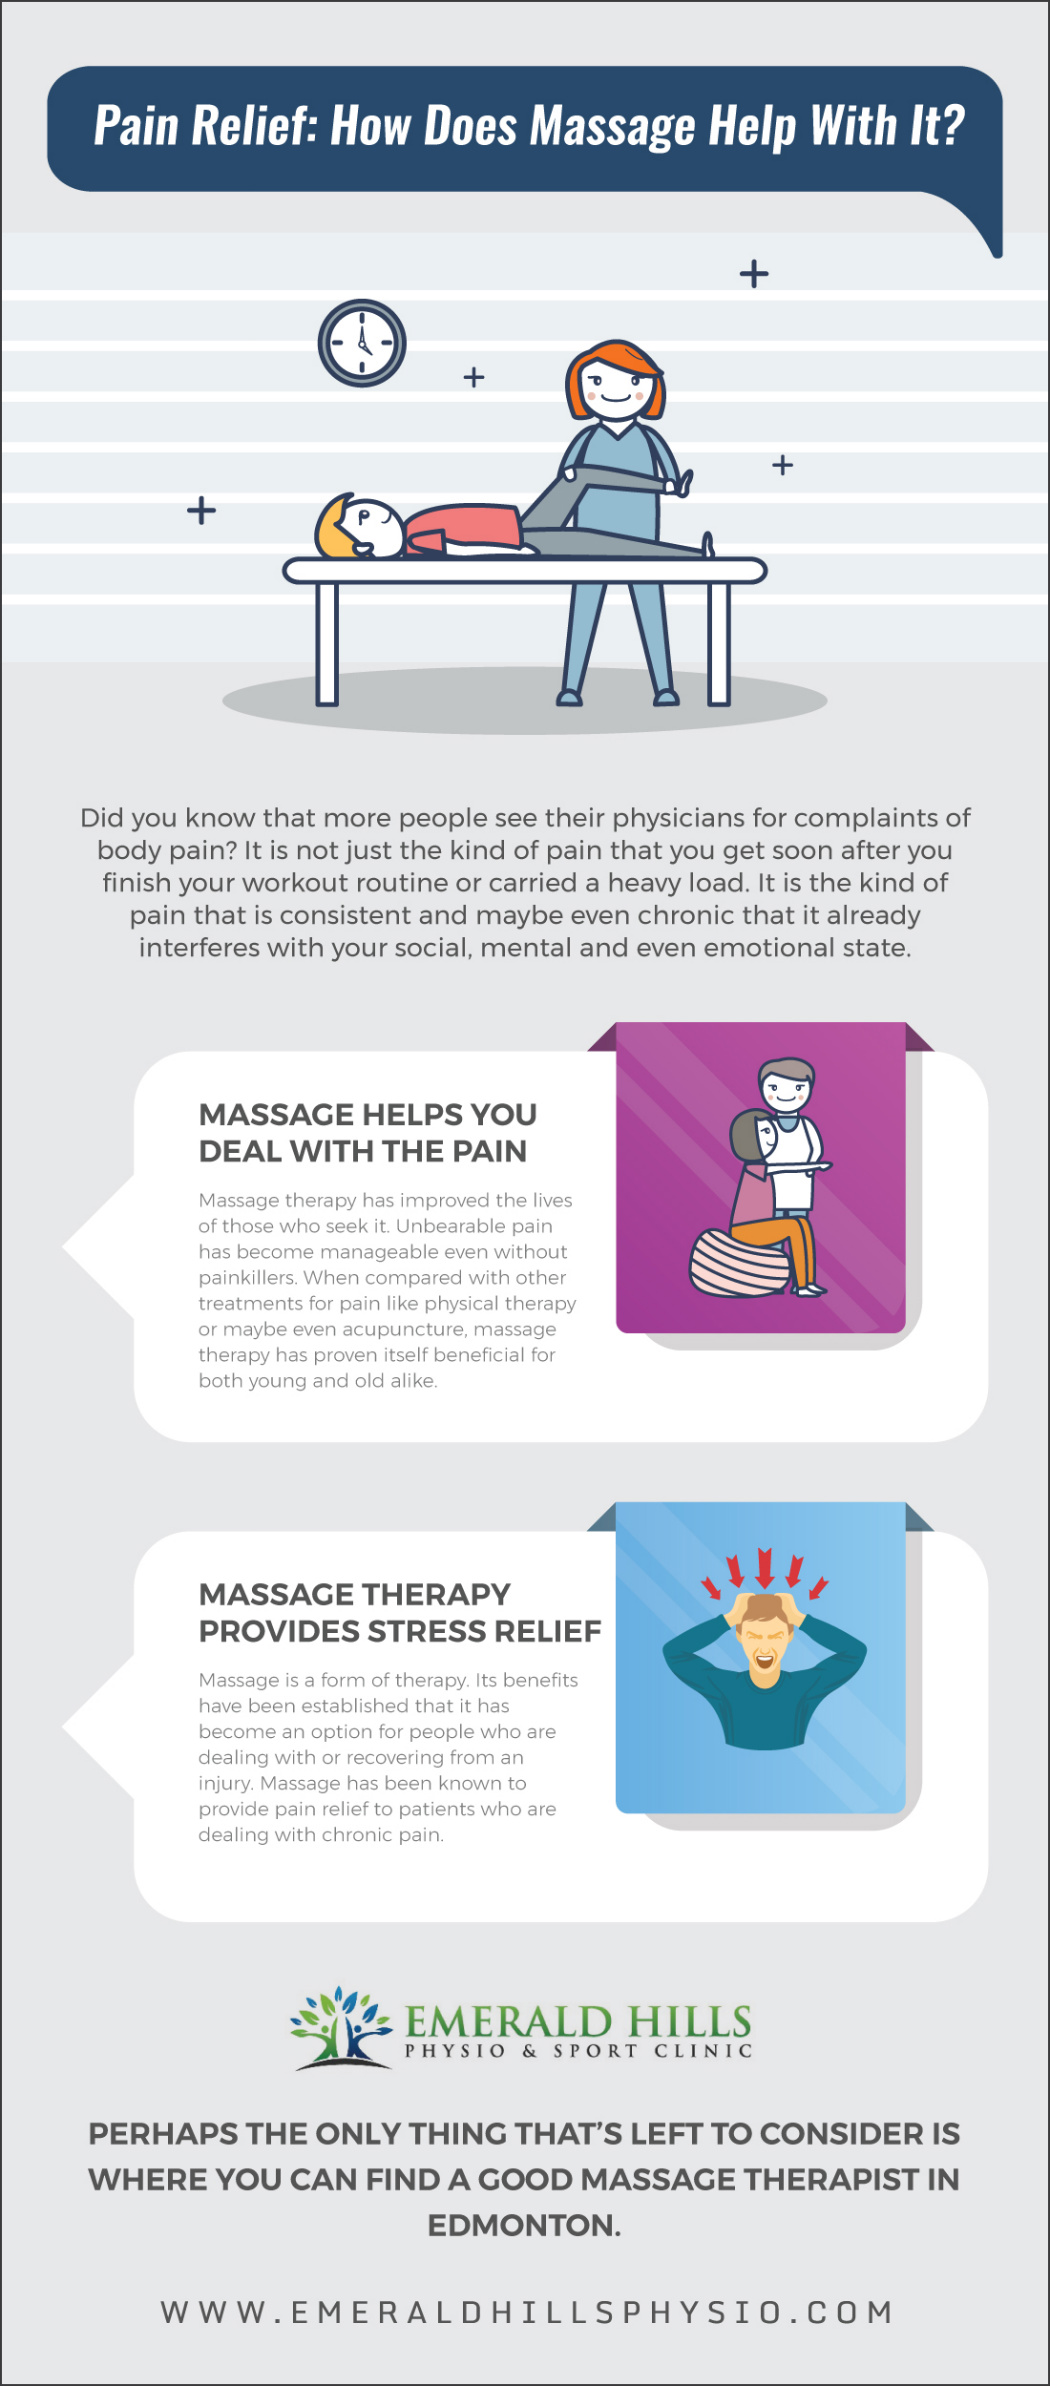 Pain Relief: How Does Massage Help With It